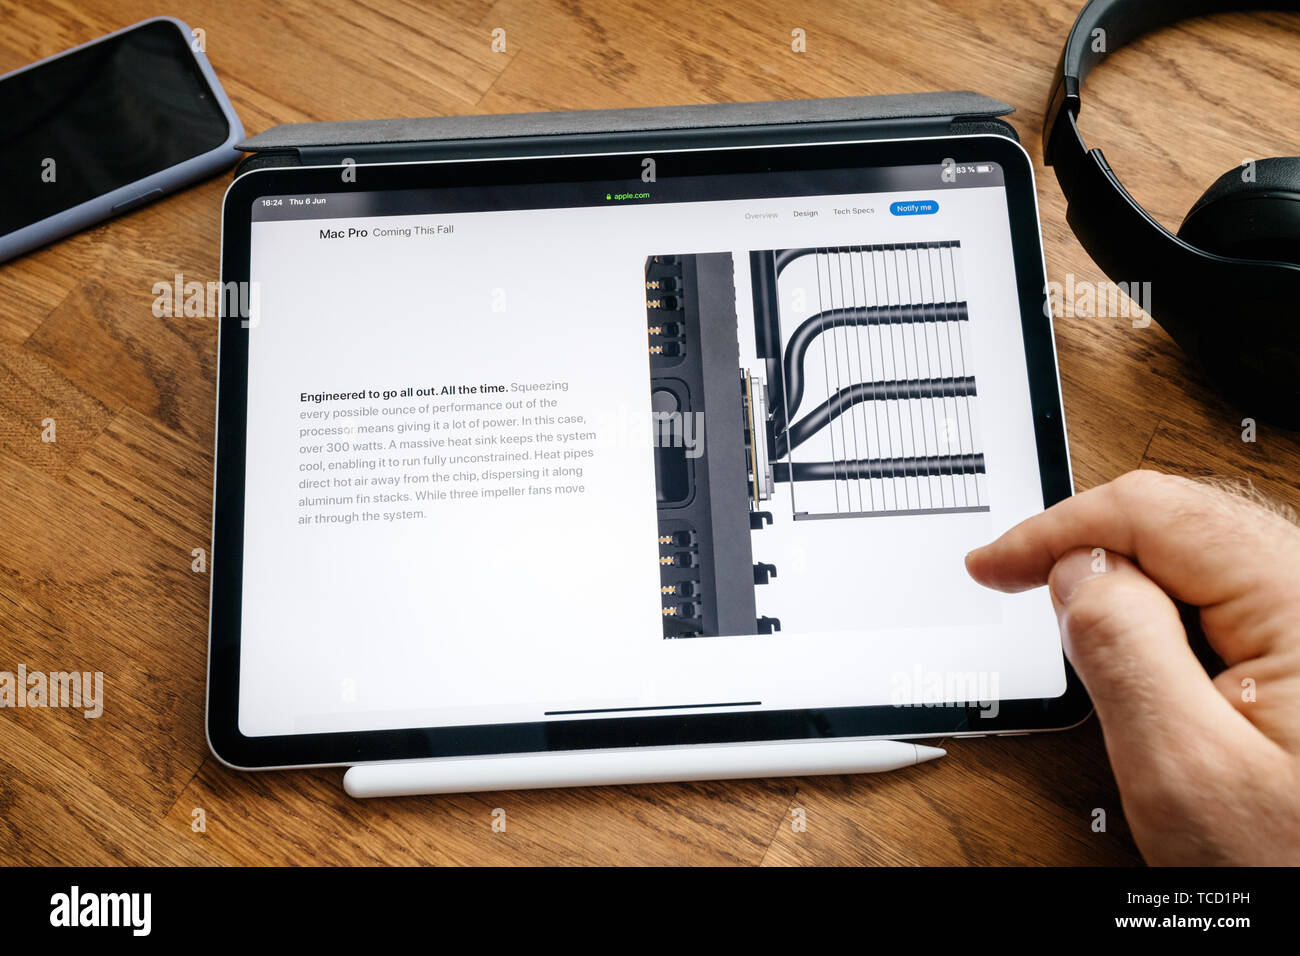 Paris, France - Jun 6, 2019: Man reading on Apple iPad Pro tablet about  latest announcement of at Developers Conference WWDC - showing the Mac Pro  workstation with CPU heat sink 300 watts Stock Photo - Alamy